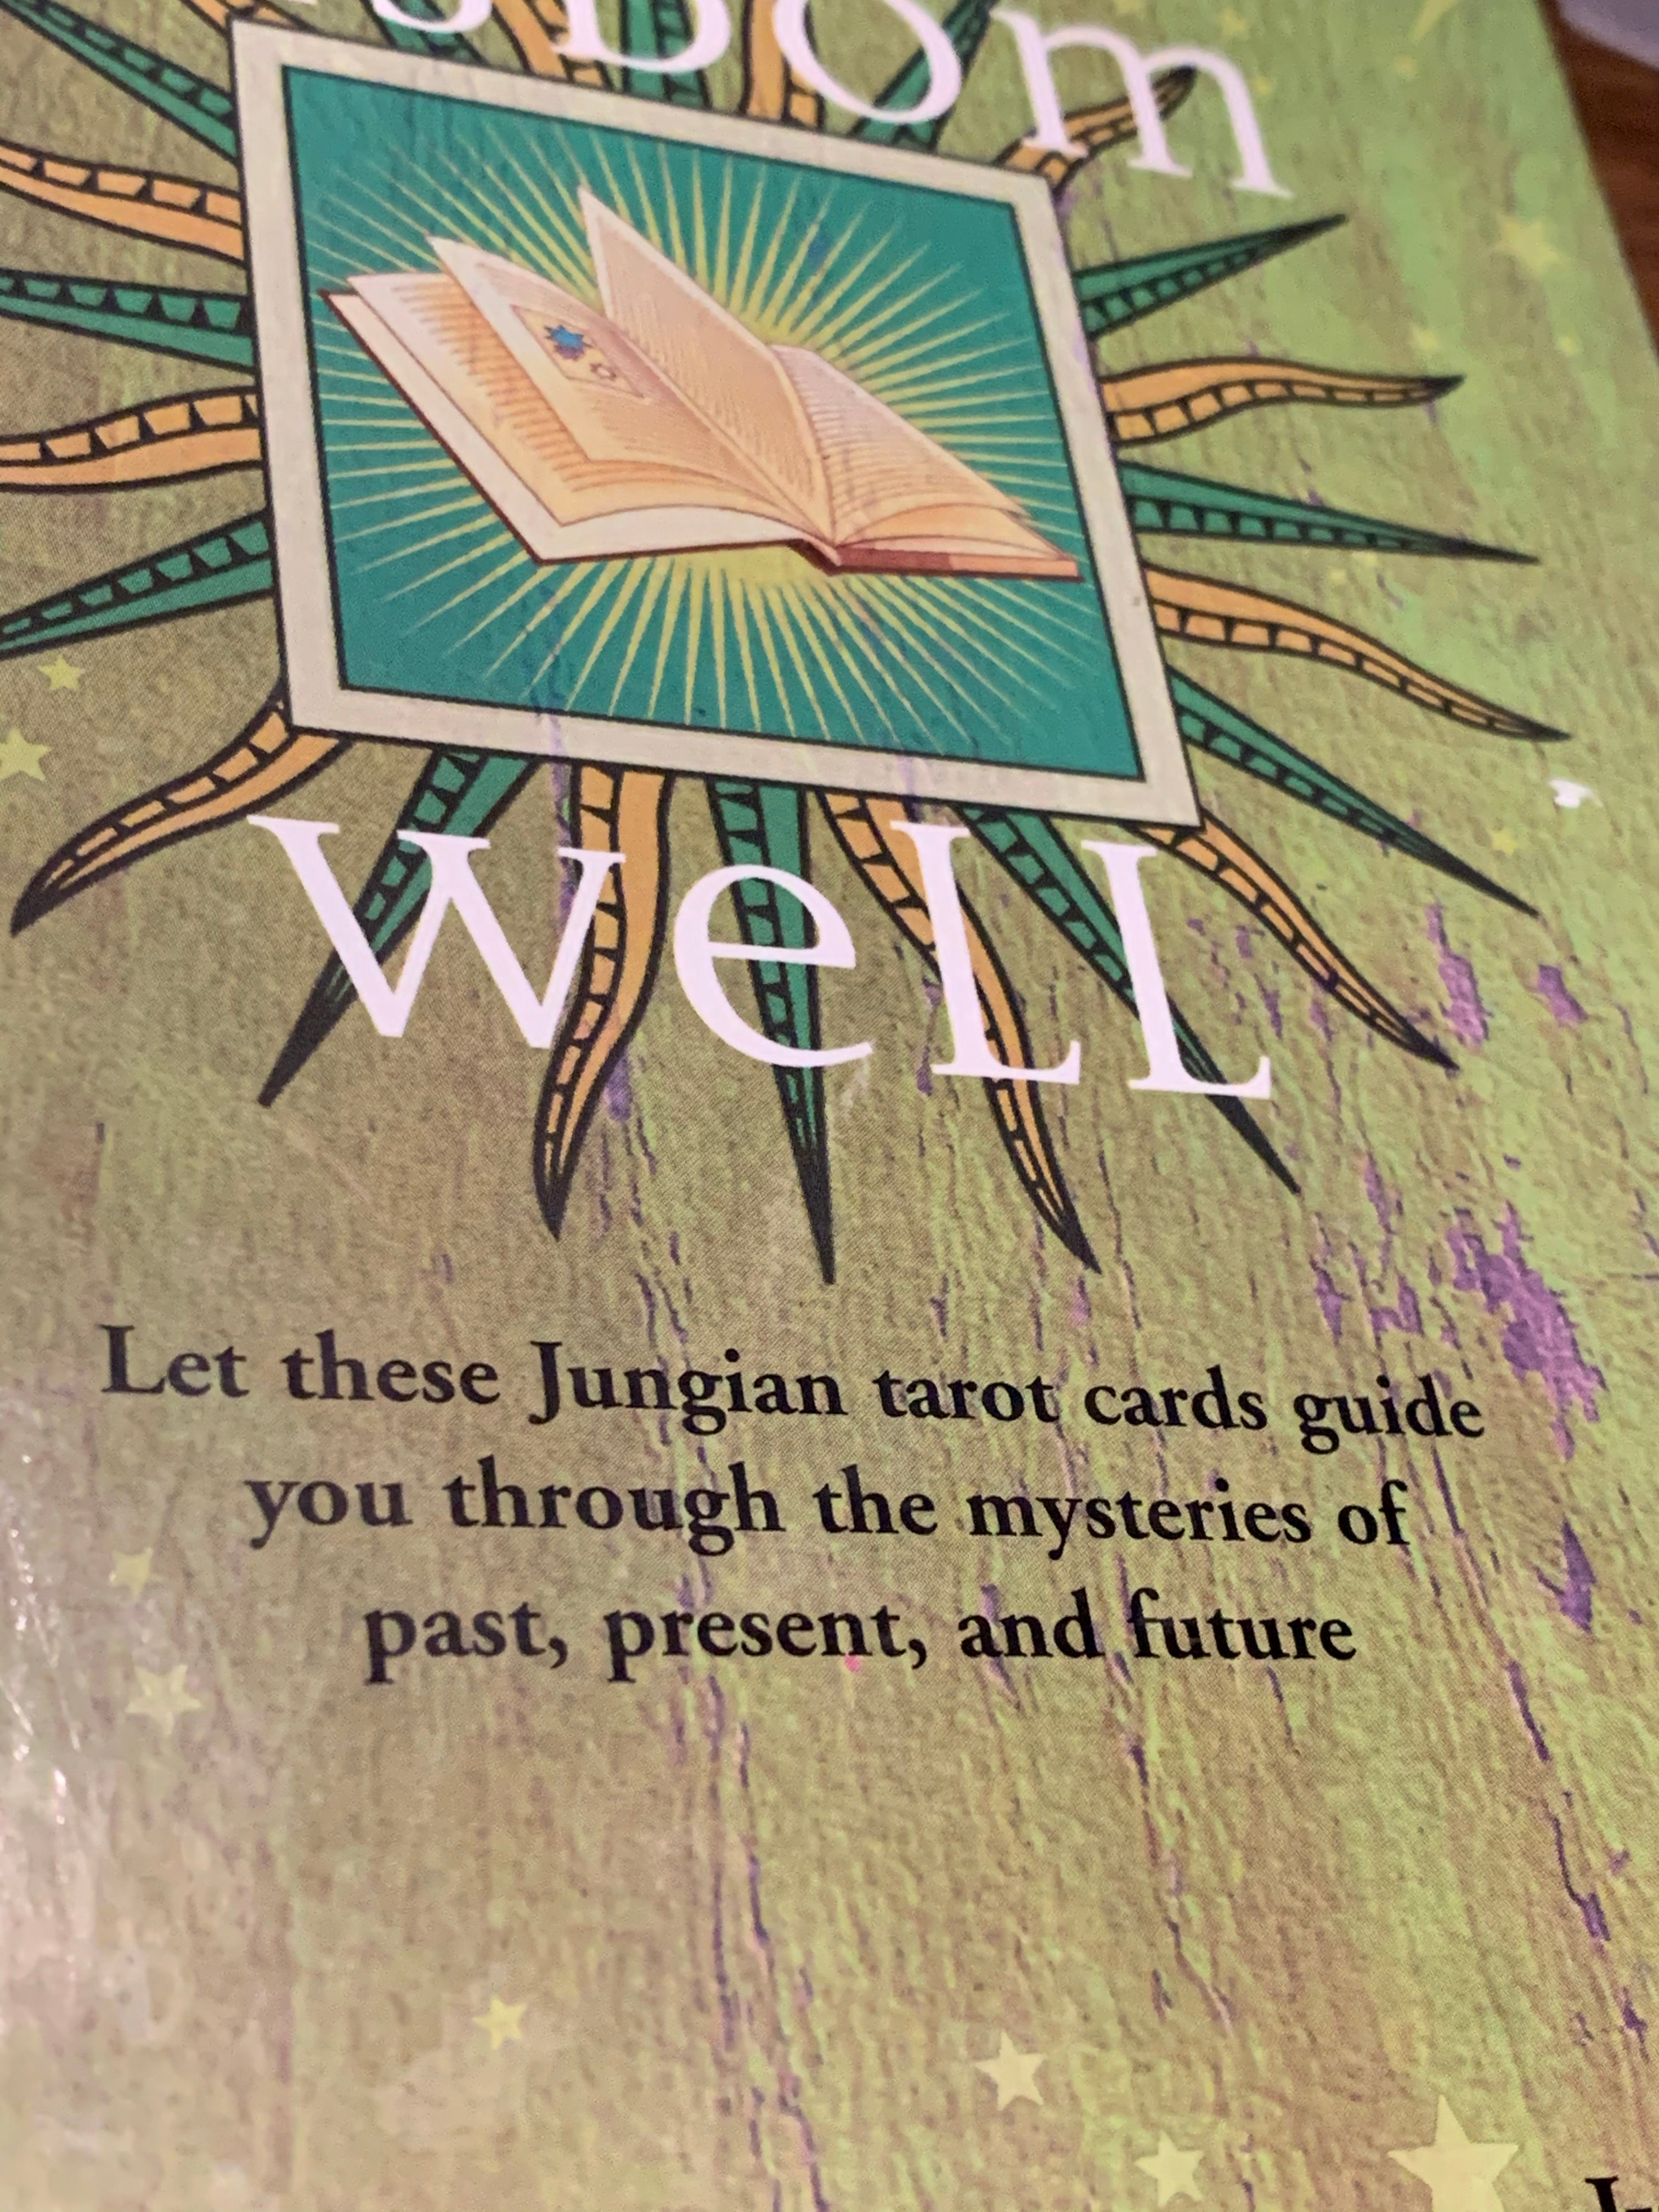 The Wisdom Well, tarot, oracle and book